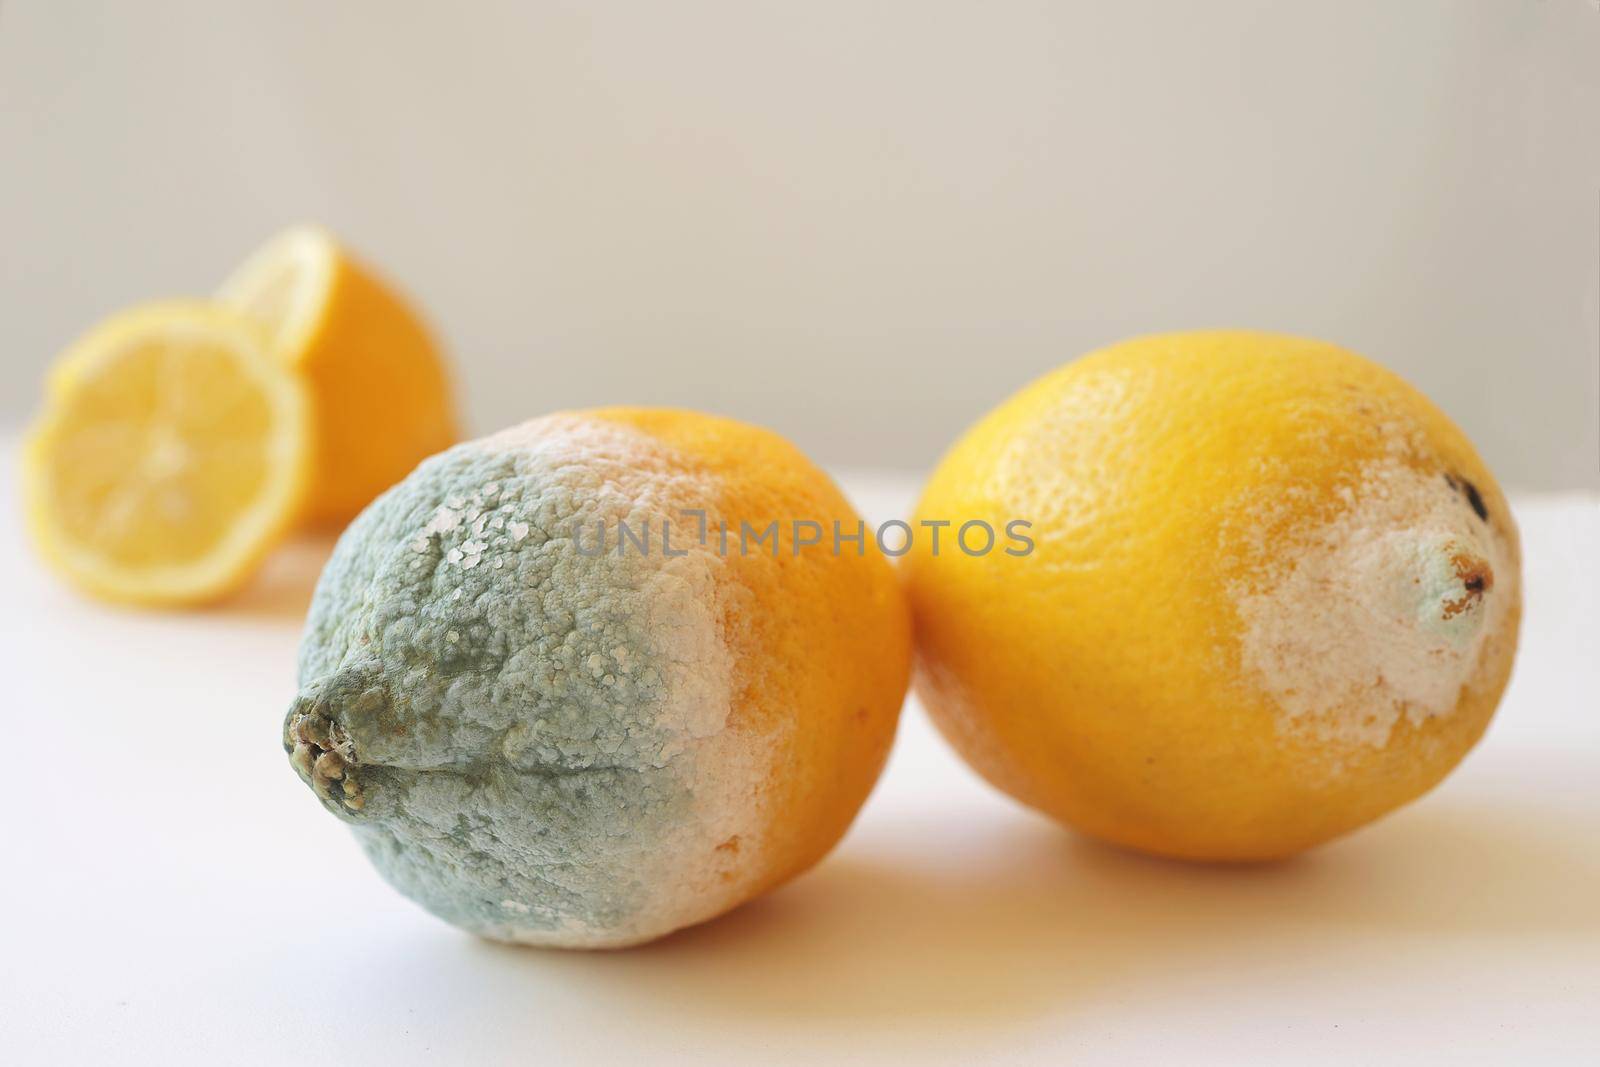 Blue mold on yellow lemon. Spoiled rotting fruit with mold on a white background. Blue-green mold on citrus fruits. Lemon with mold and fresh lemon on a white background. Moldy lemon. Green moldy lemon. Spoiled lemon with mold